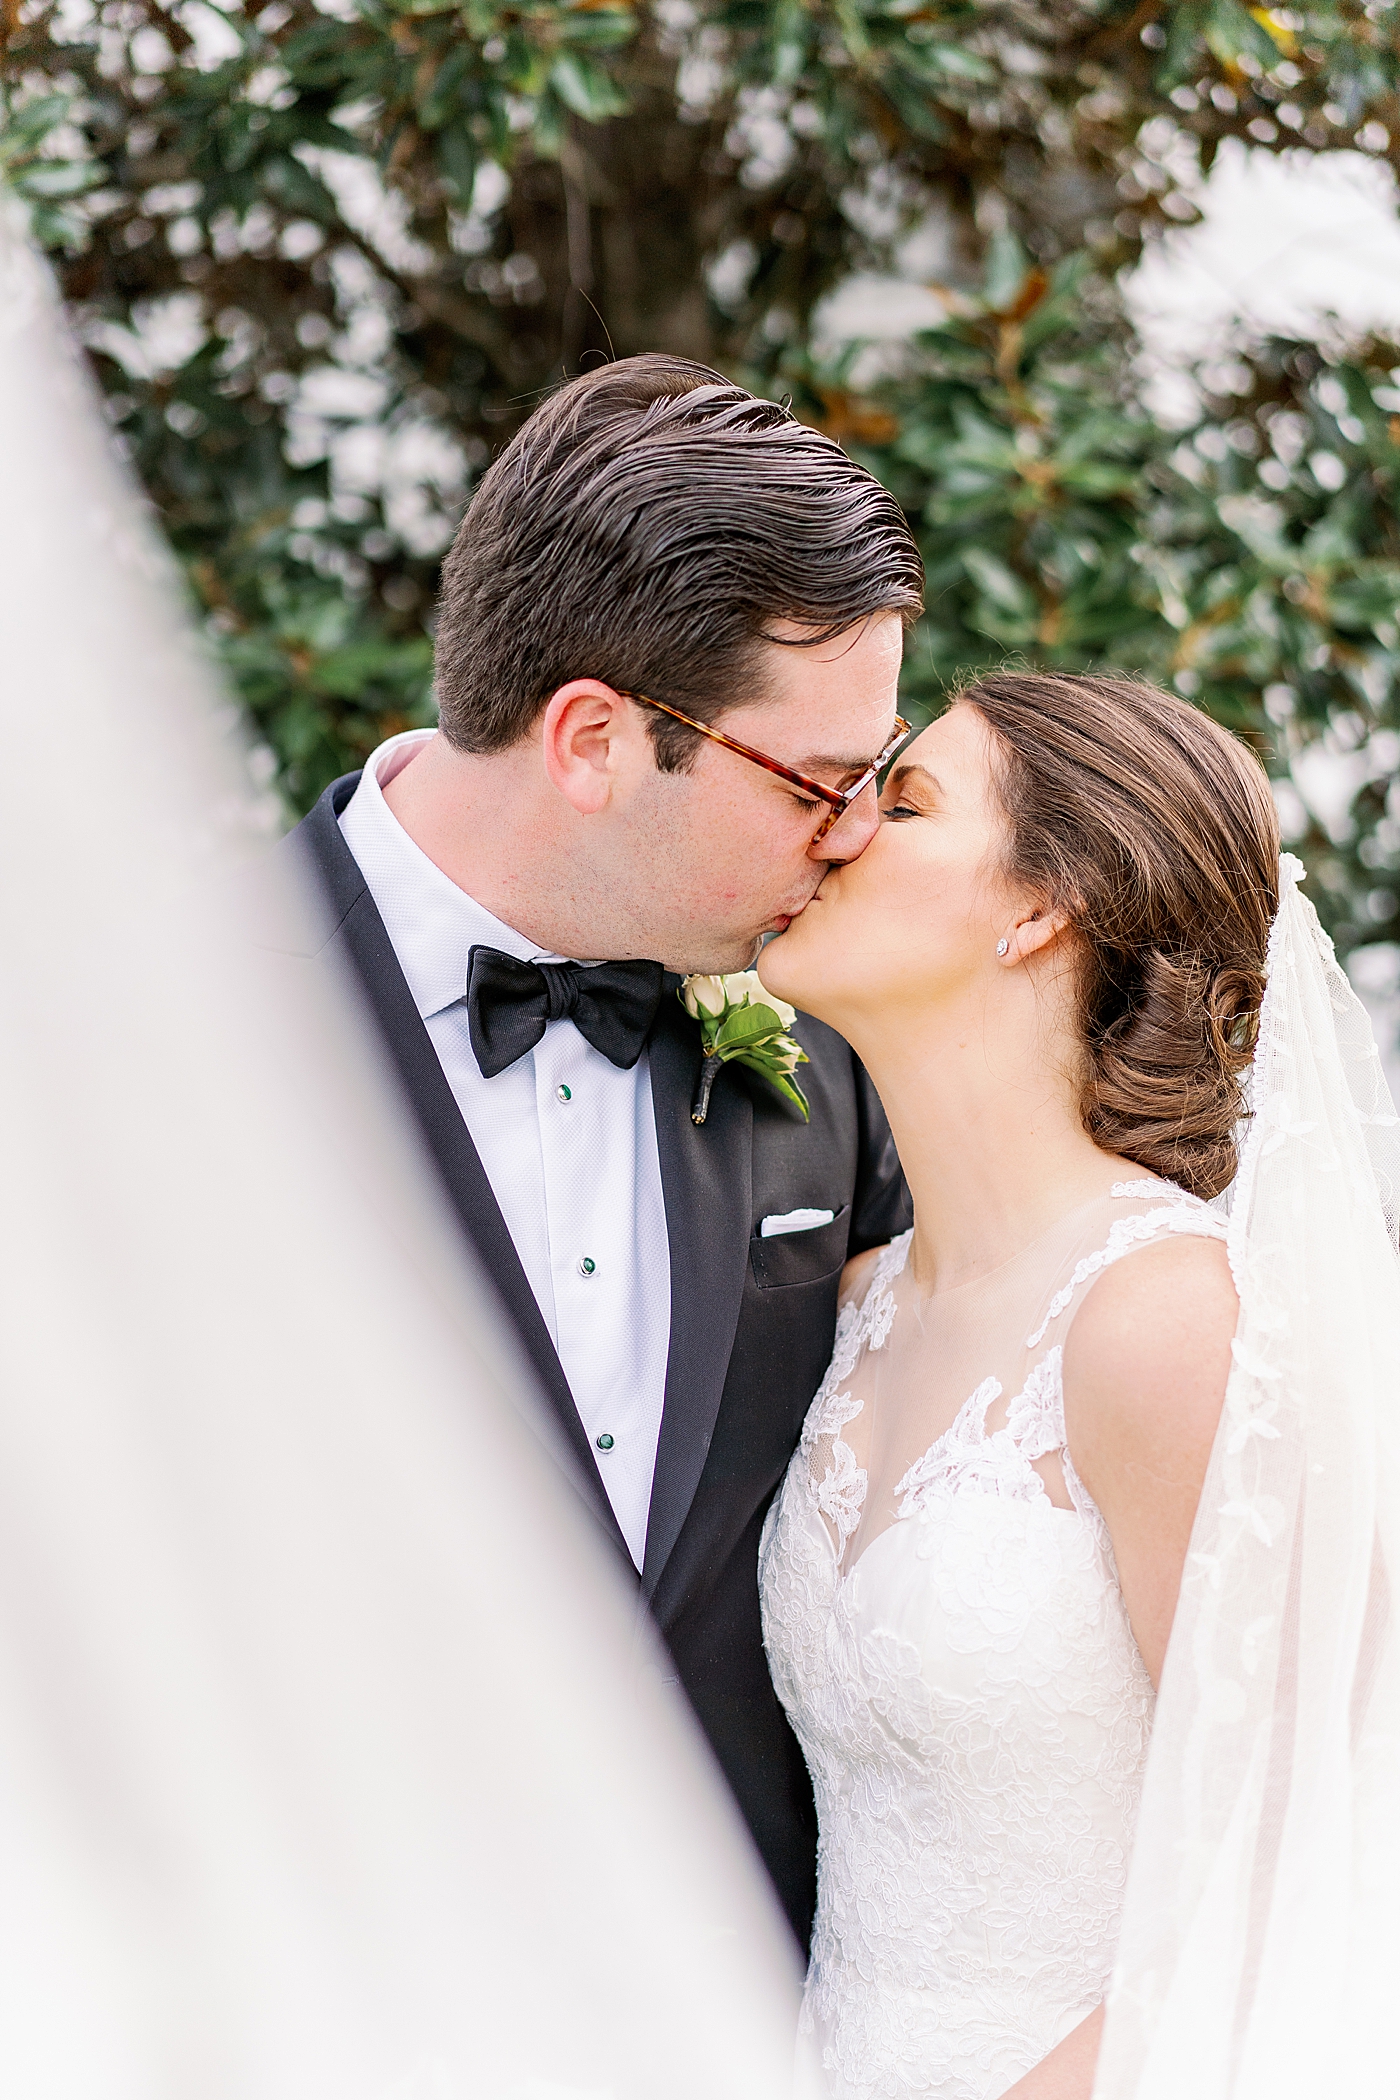 Bride and groom kissing behind bride's veil | Photo by Annie Laura Photography